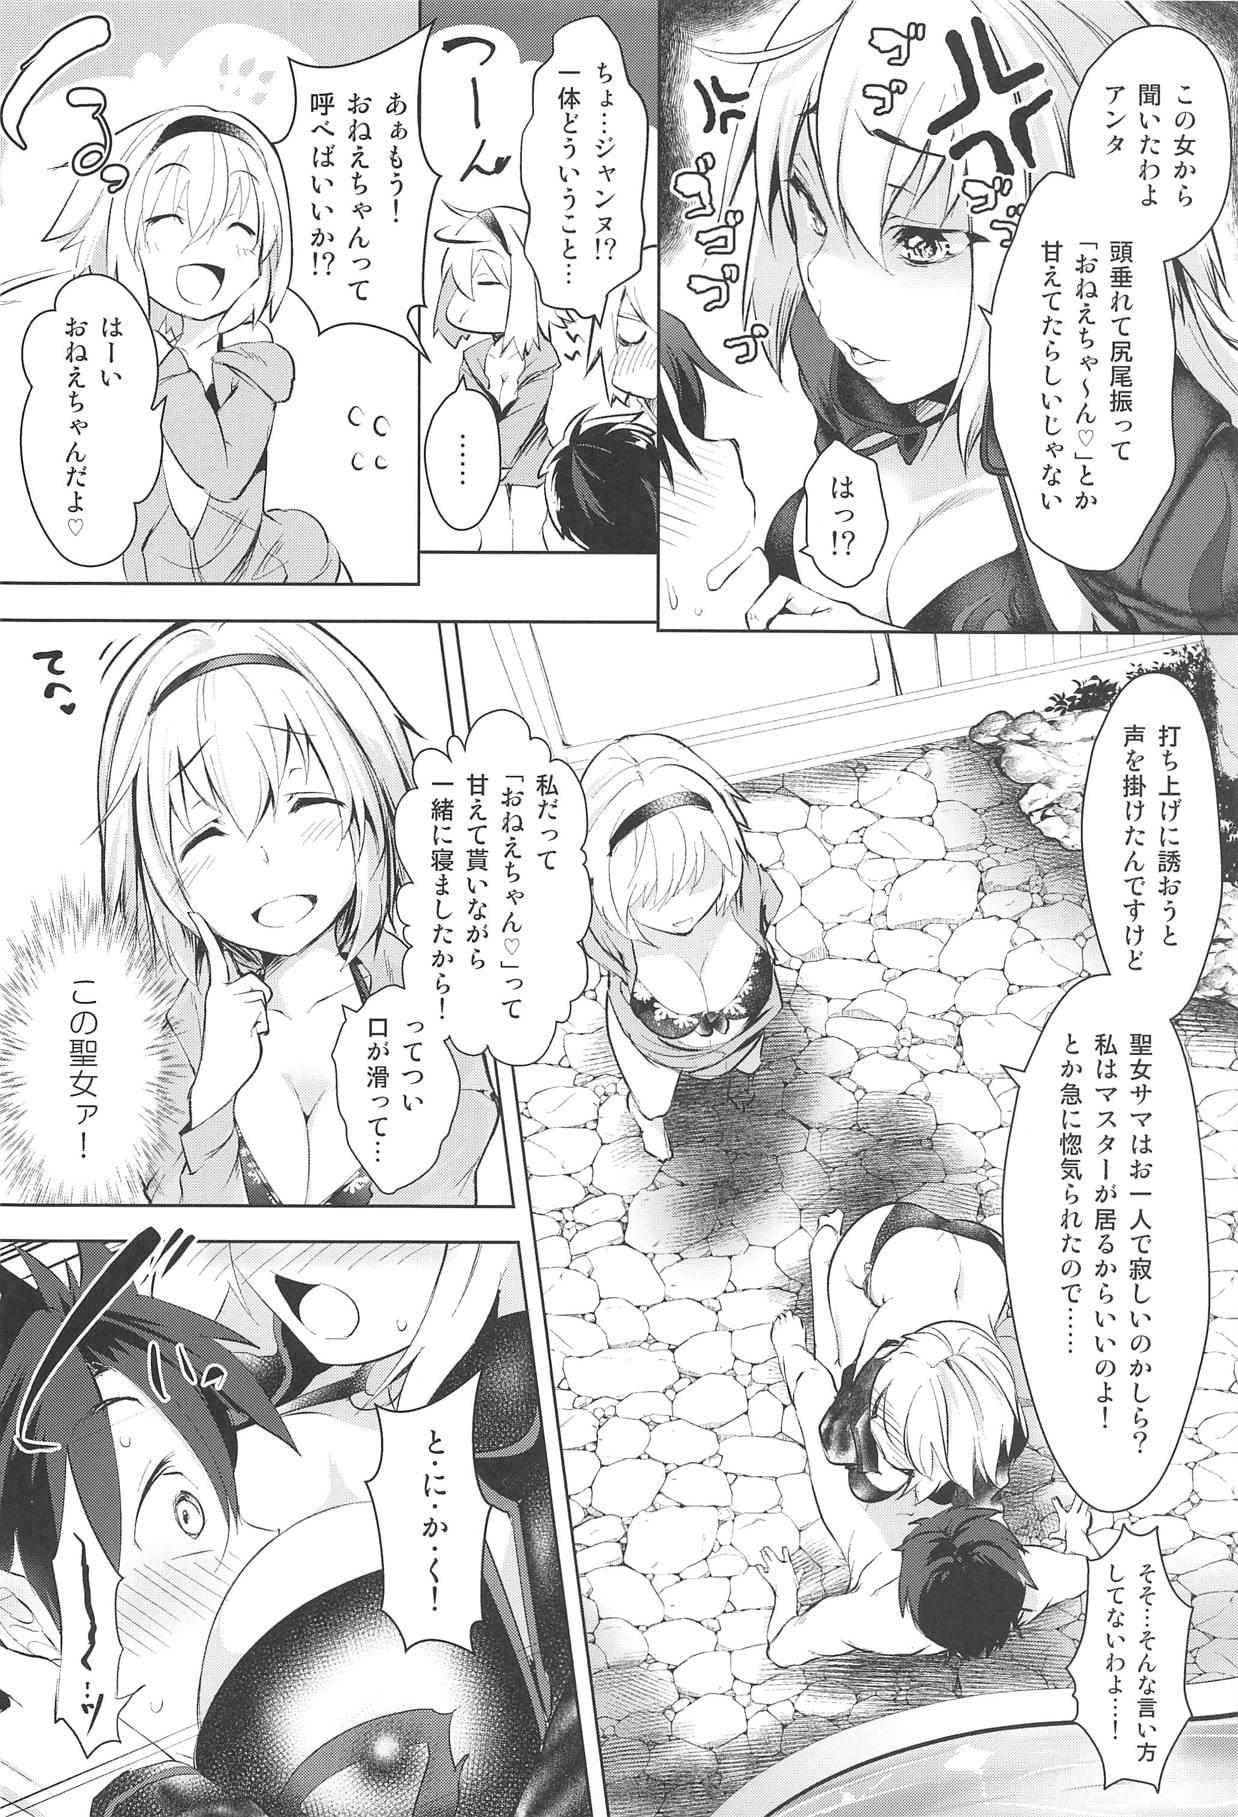 Bedroom LuluHawa Hot Spring - Fate grand order Verified Profile - Page 3